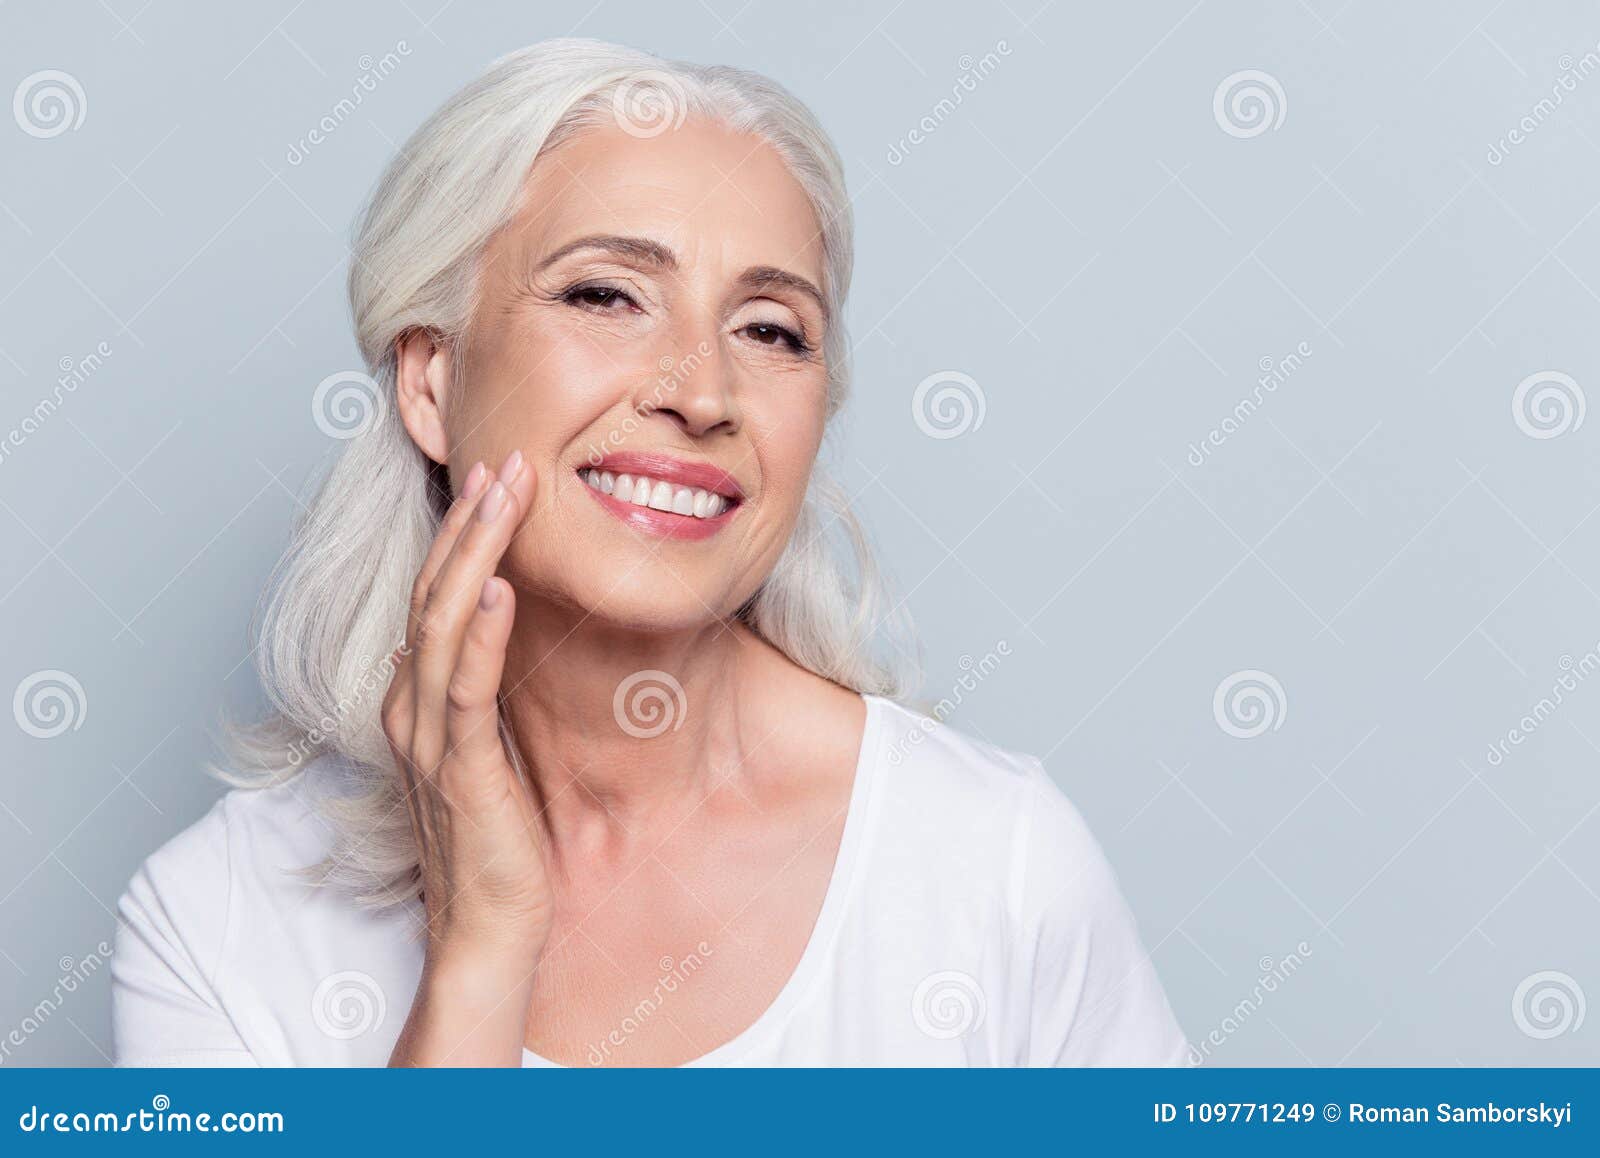 charming, pretty, old woman touching her perfect soft face skin